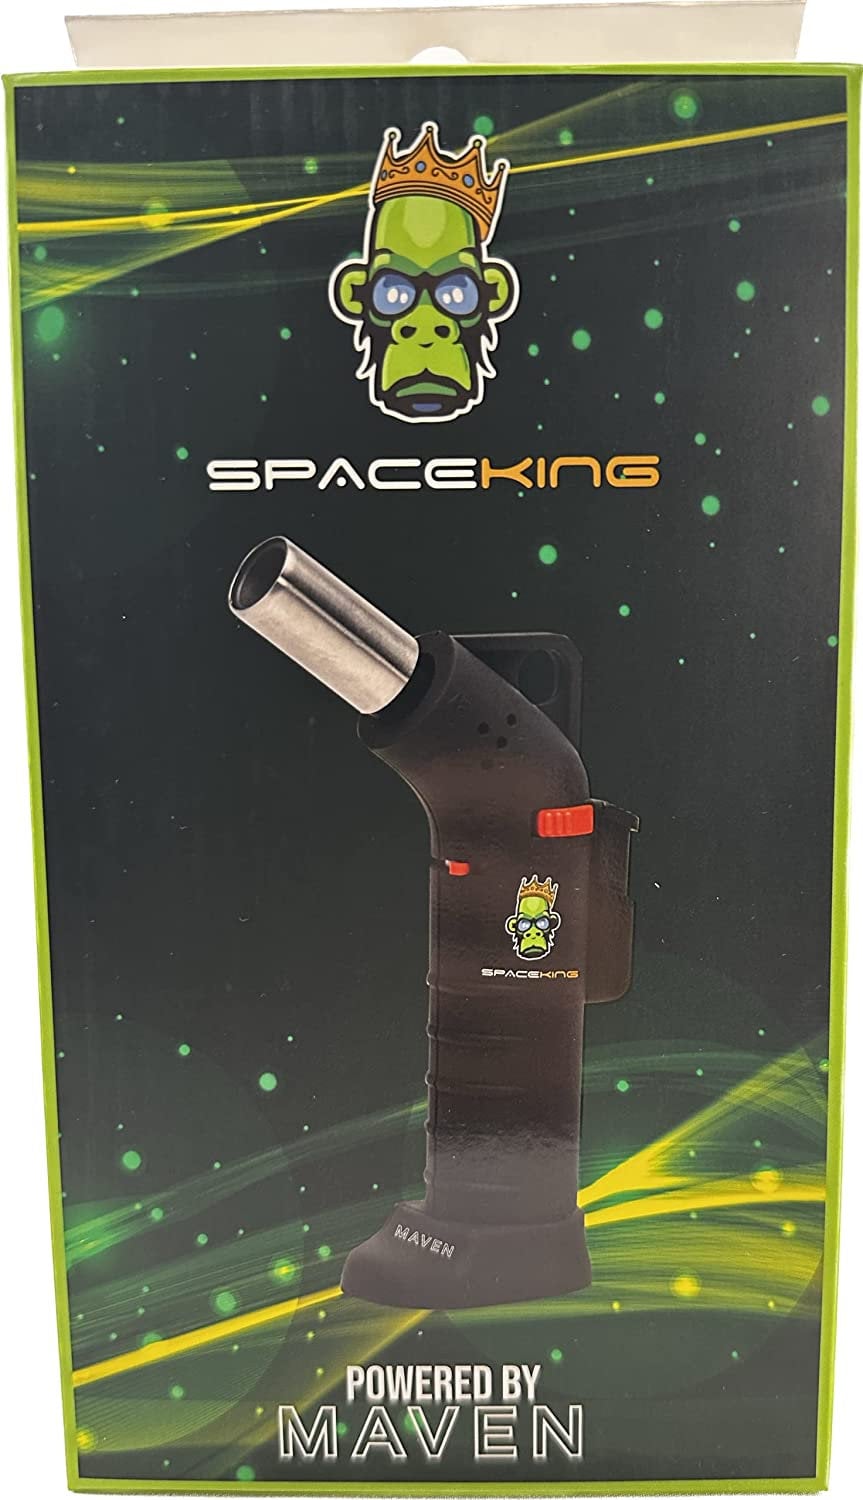 Space King powerful single jet angled flame torch lighter - Smooth Finish - Premium Quality - Adjustable Flame & Lock Function (Black)